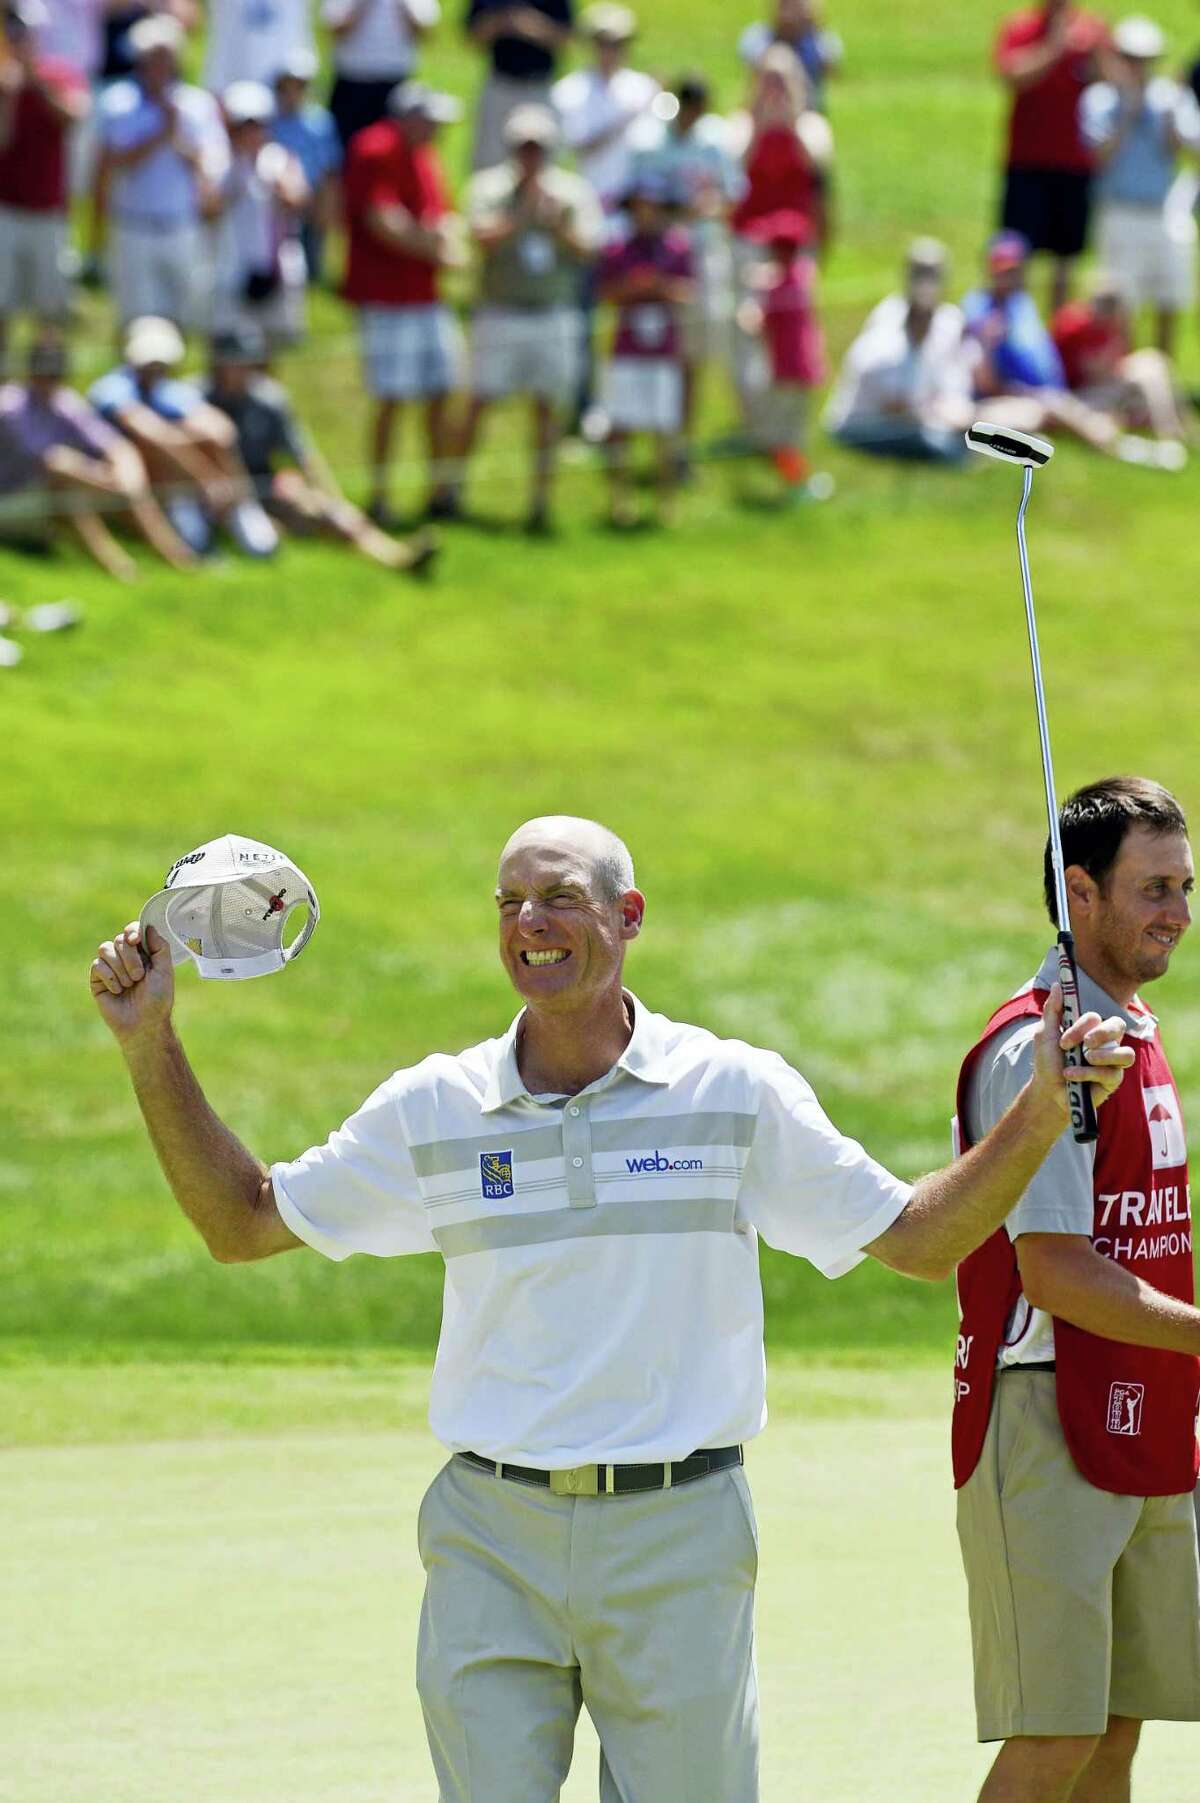 Jim Furyk celebrates after shooting a PGA-record 58 during the final round of the Travelers in Cromwell on Sunday.